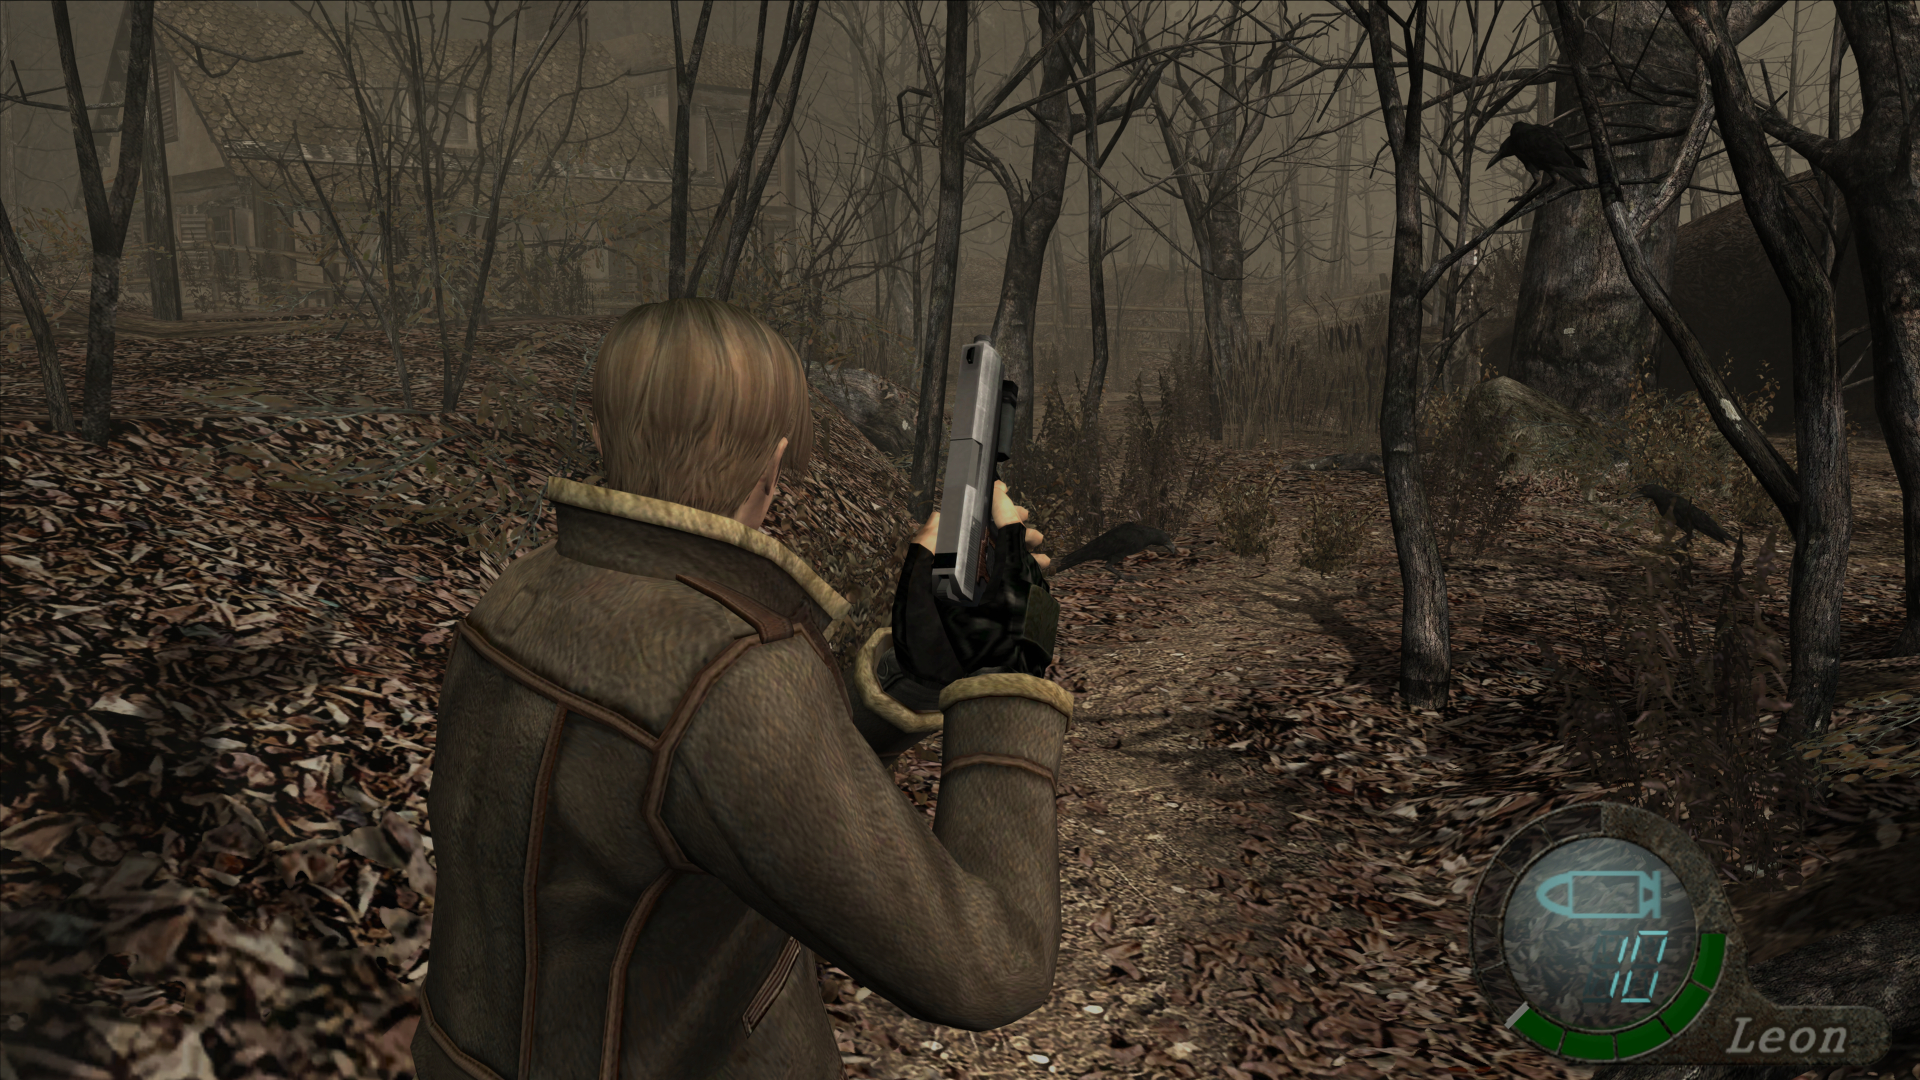 Steam resident evil 4 ultimate hd фото 92